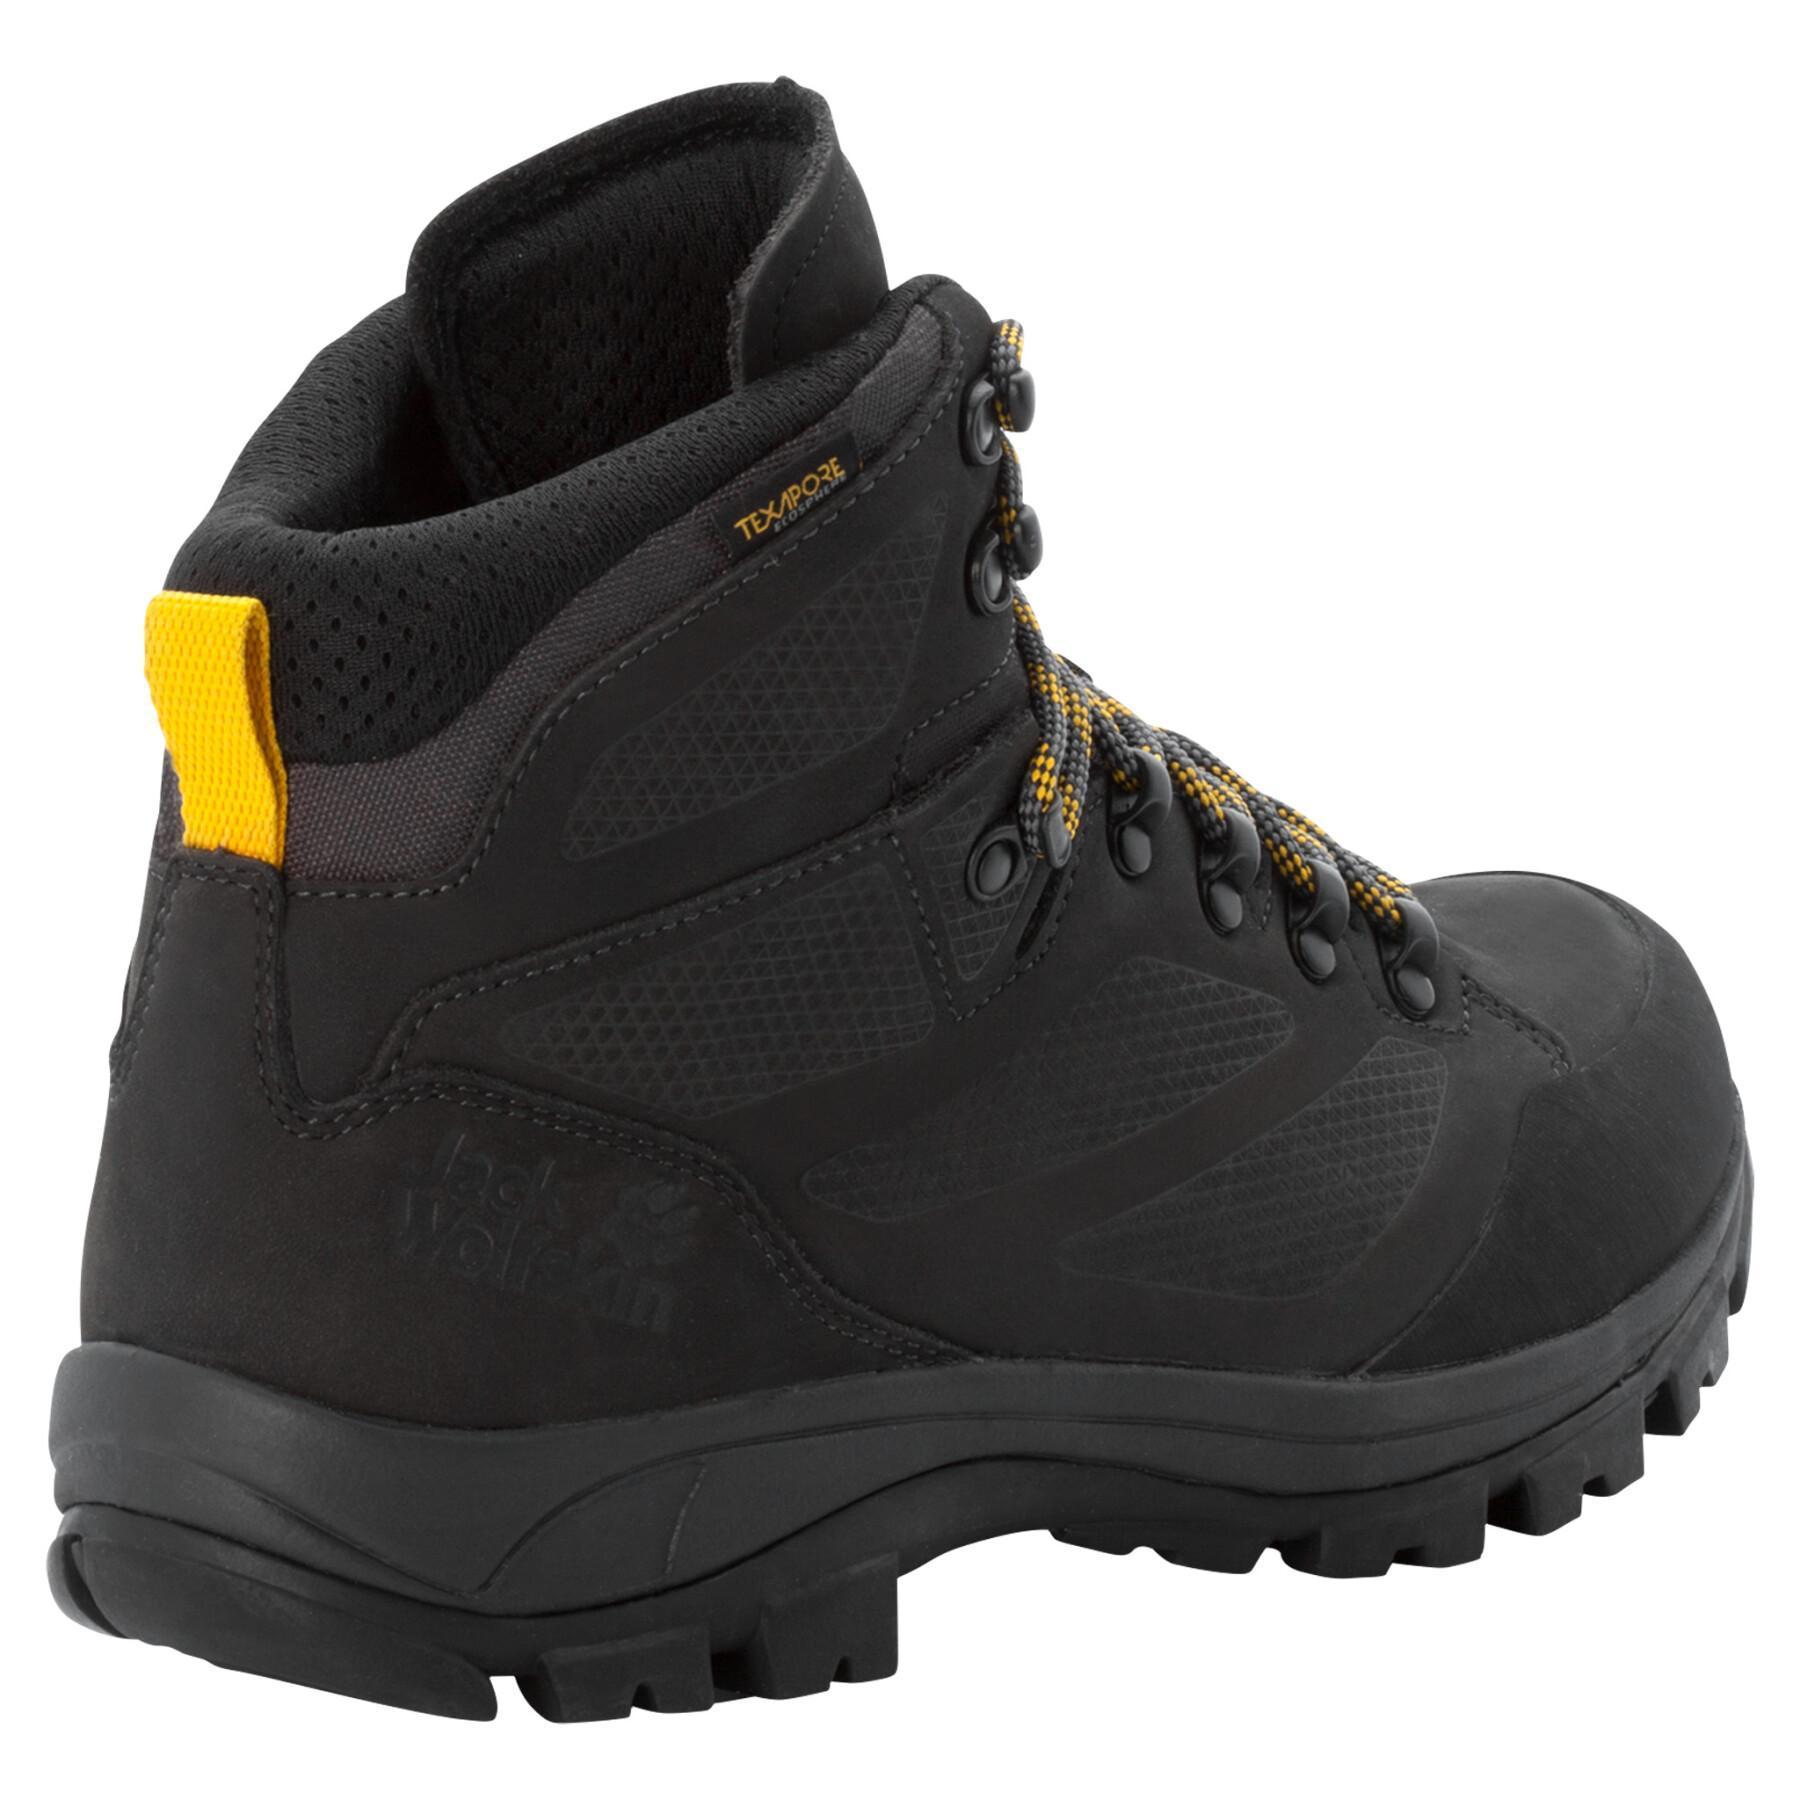 Hiking shoes Jack Wolfskin Rebellion Texapore Mid GT